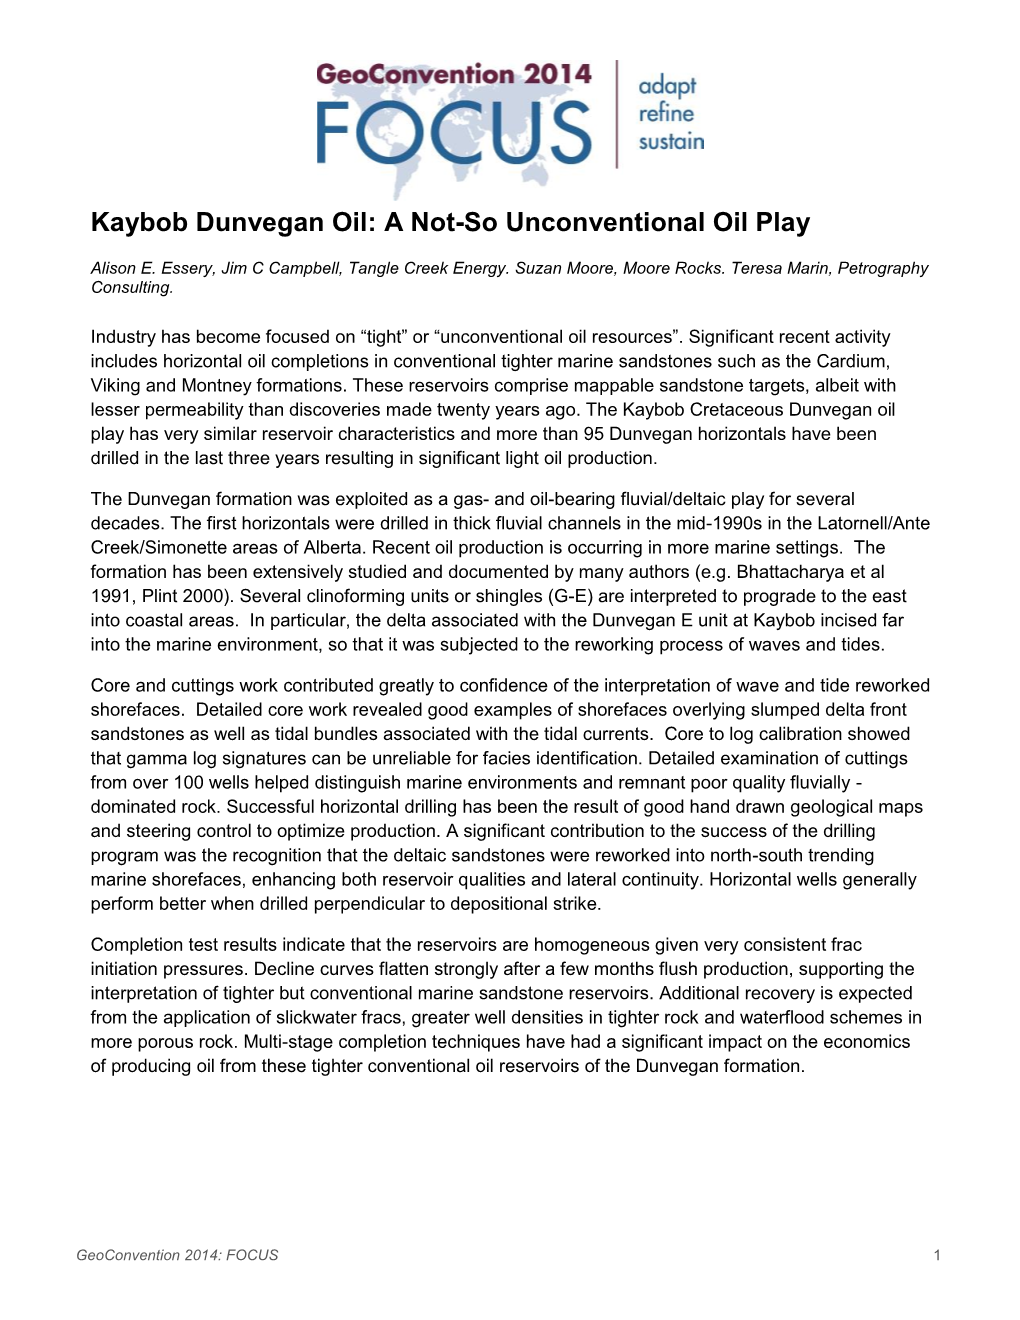 Kaybob Dunvegan Oil: a Not-So Unconventional Oil Play